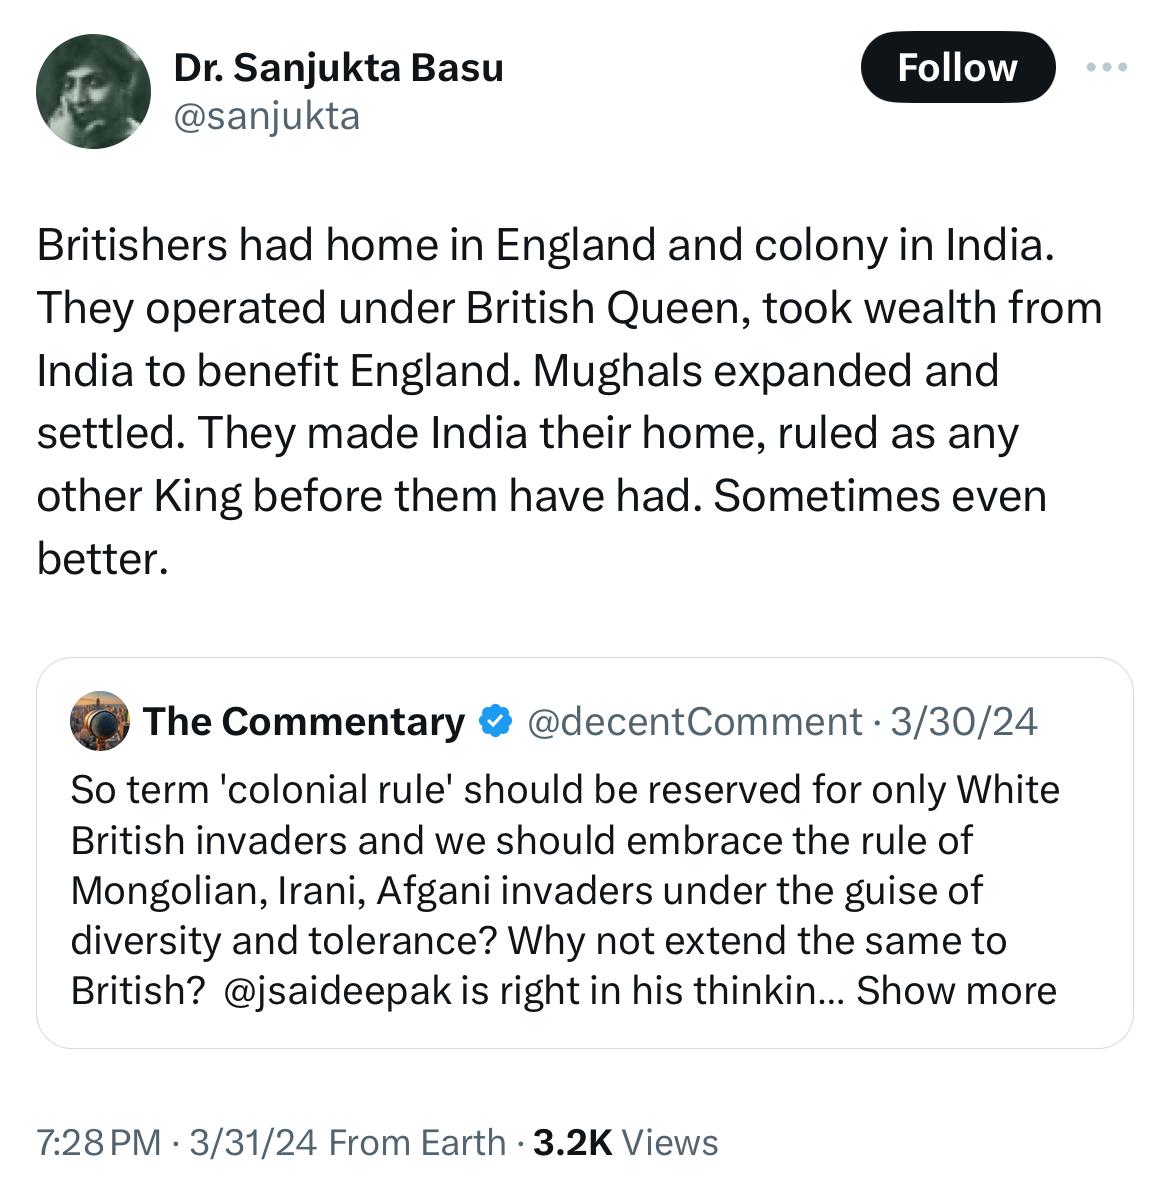 To paraphrase, “the British took wealth from India and the Mughals didn’t.” Not the first time this has been said, but the statement reeks of ignorance at best and apologia at worst. In a few quick tweets, let’s assess this claim against recorded history.